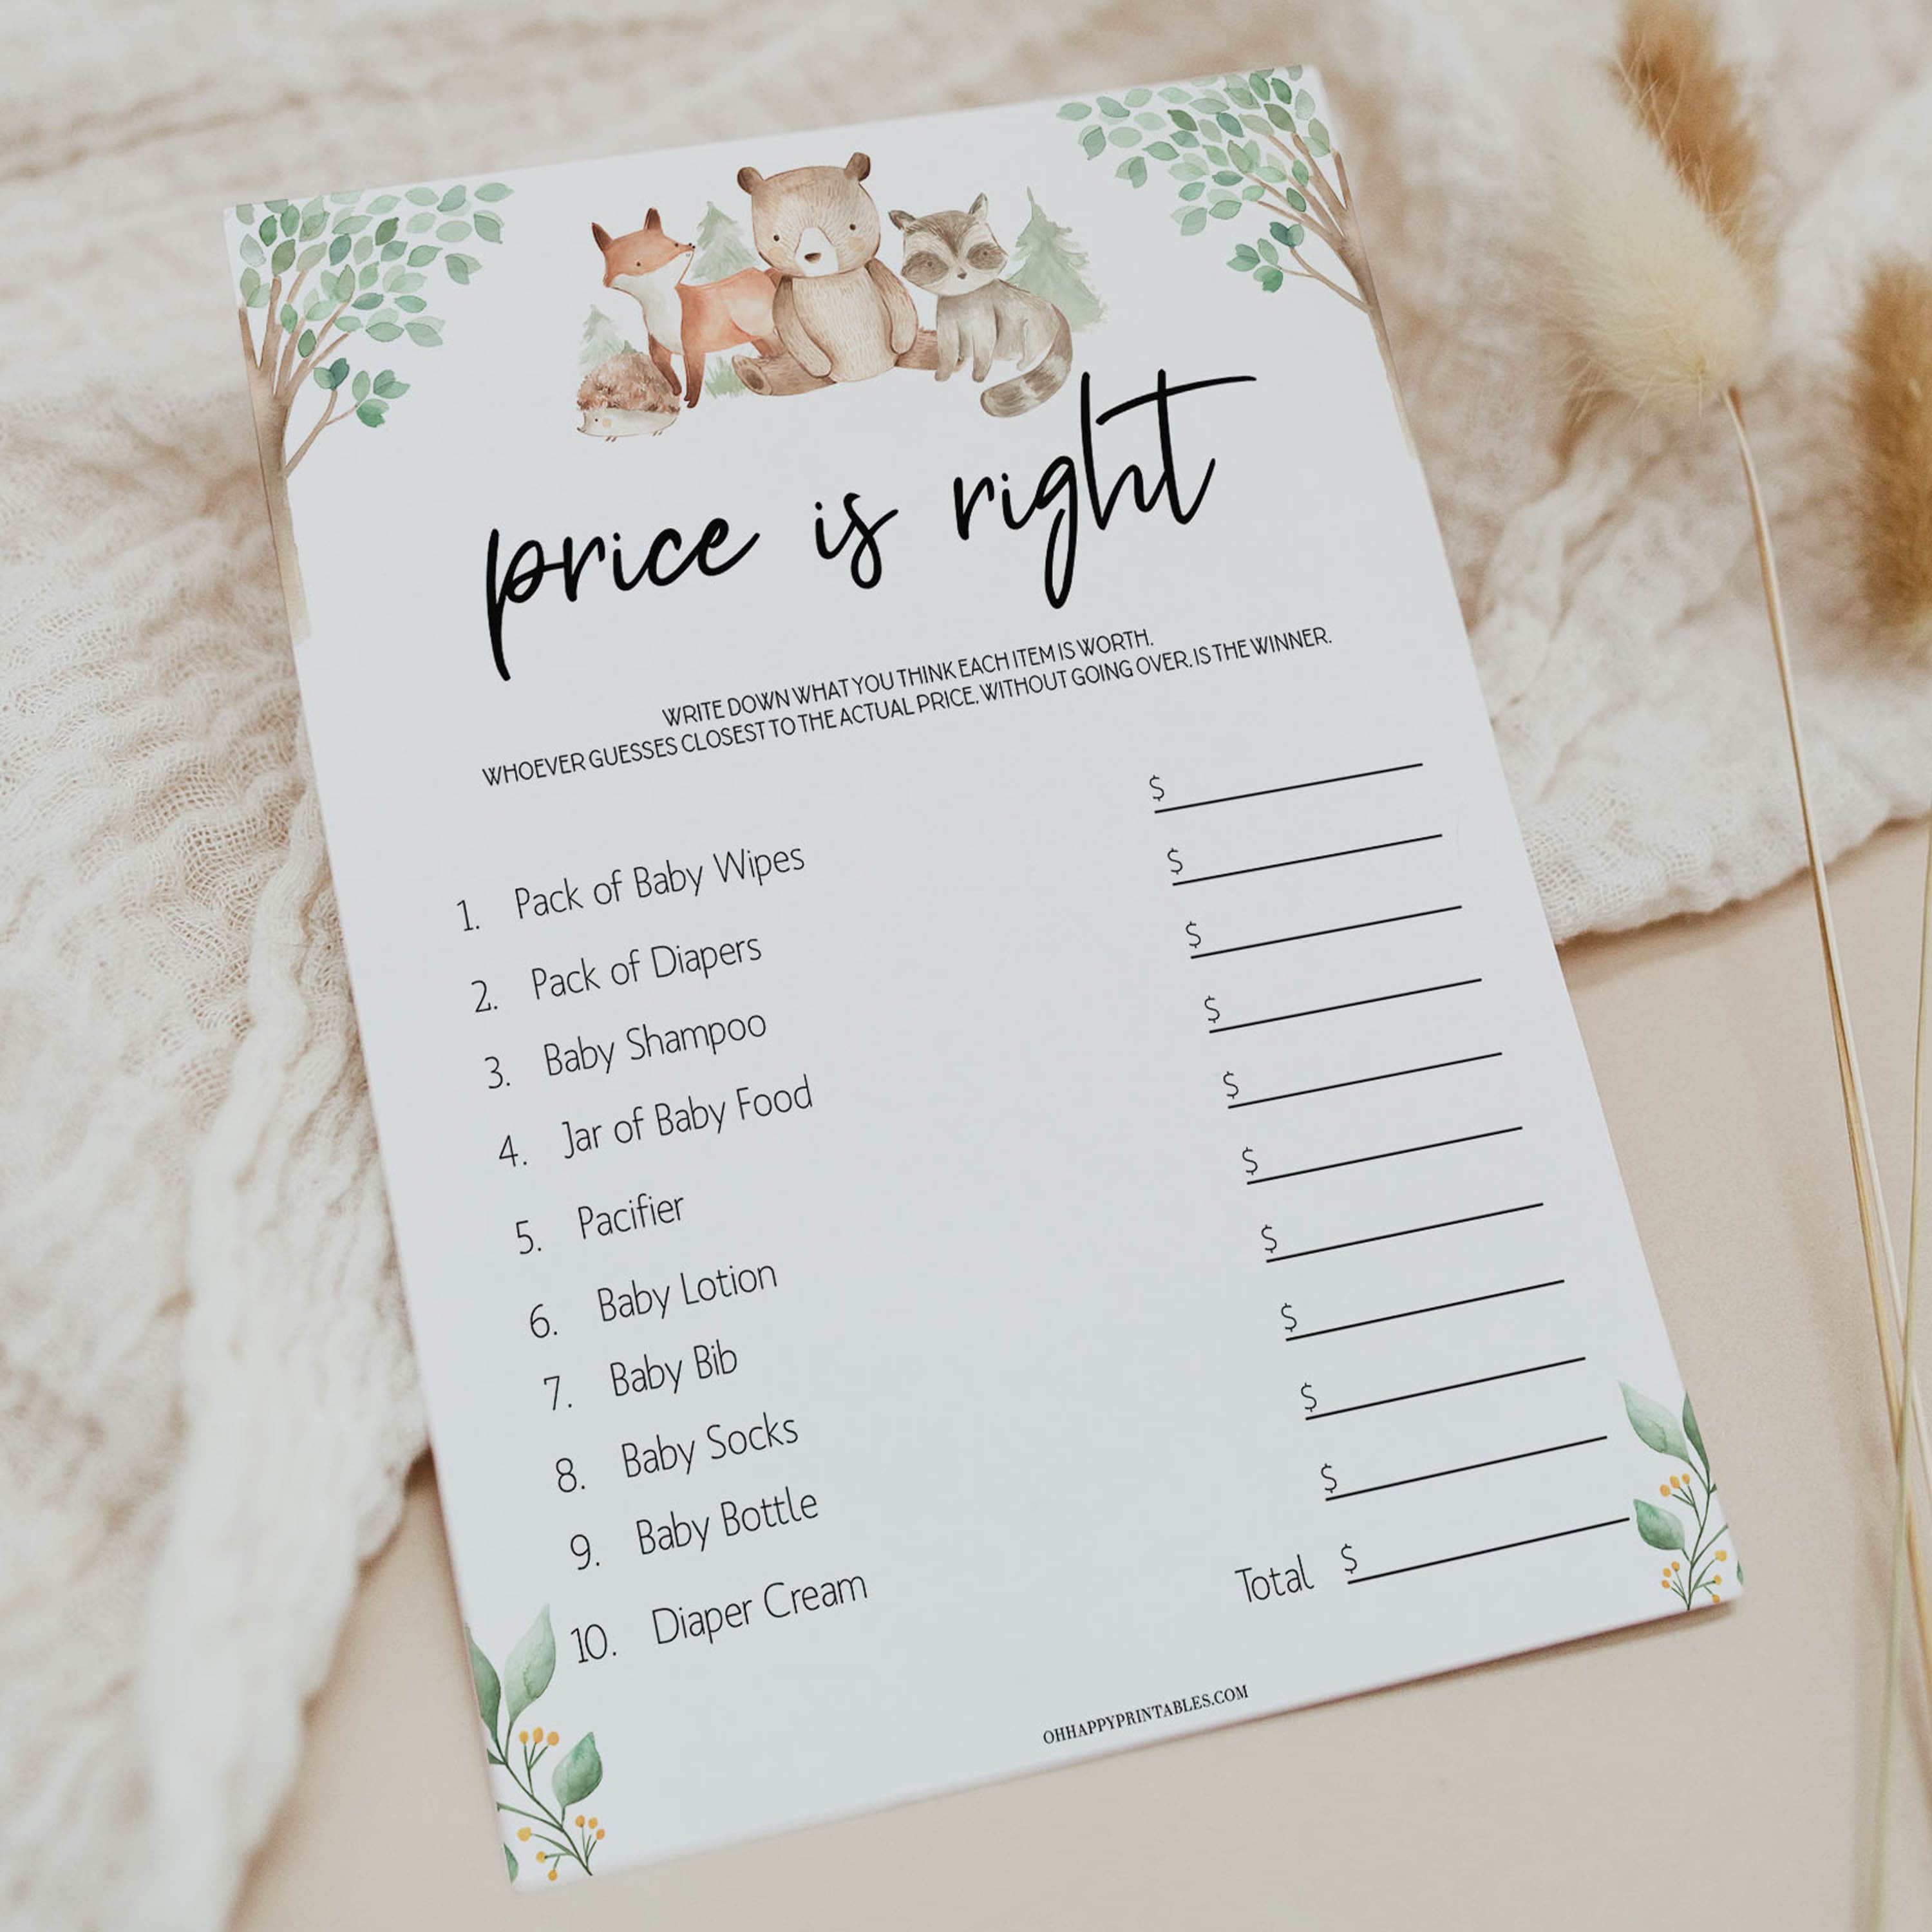 price is right baby shower game, Printable baby shower games, woodland animals baby games, baby shower games, fun baby shower ideas, top baby shower ideas, woodland baby shower, baby shower games, fun woodland animals baby shower ideas